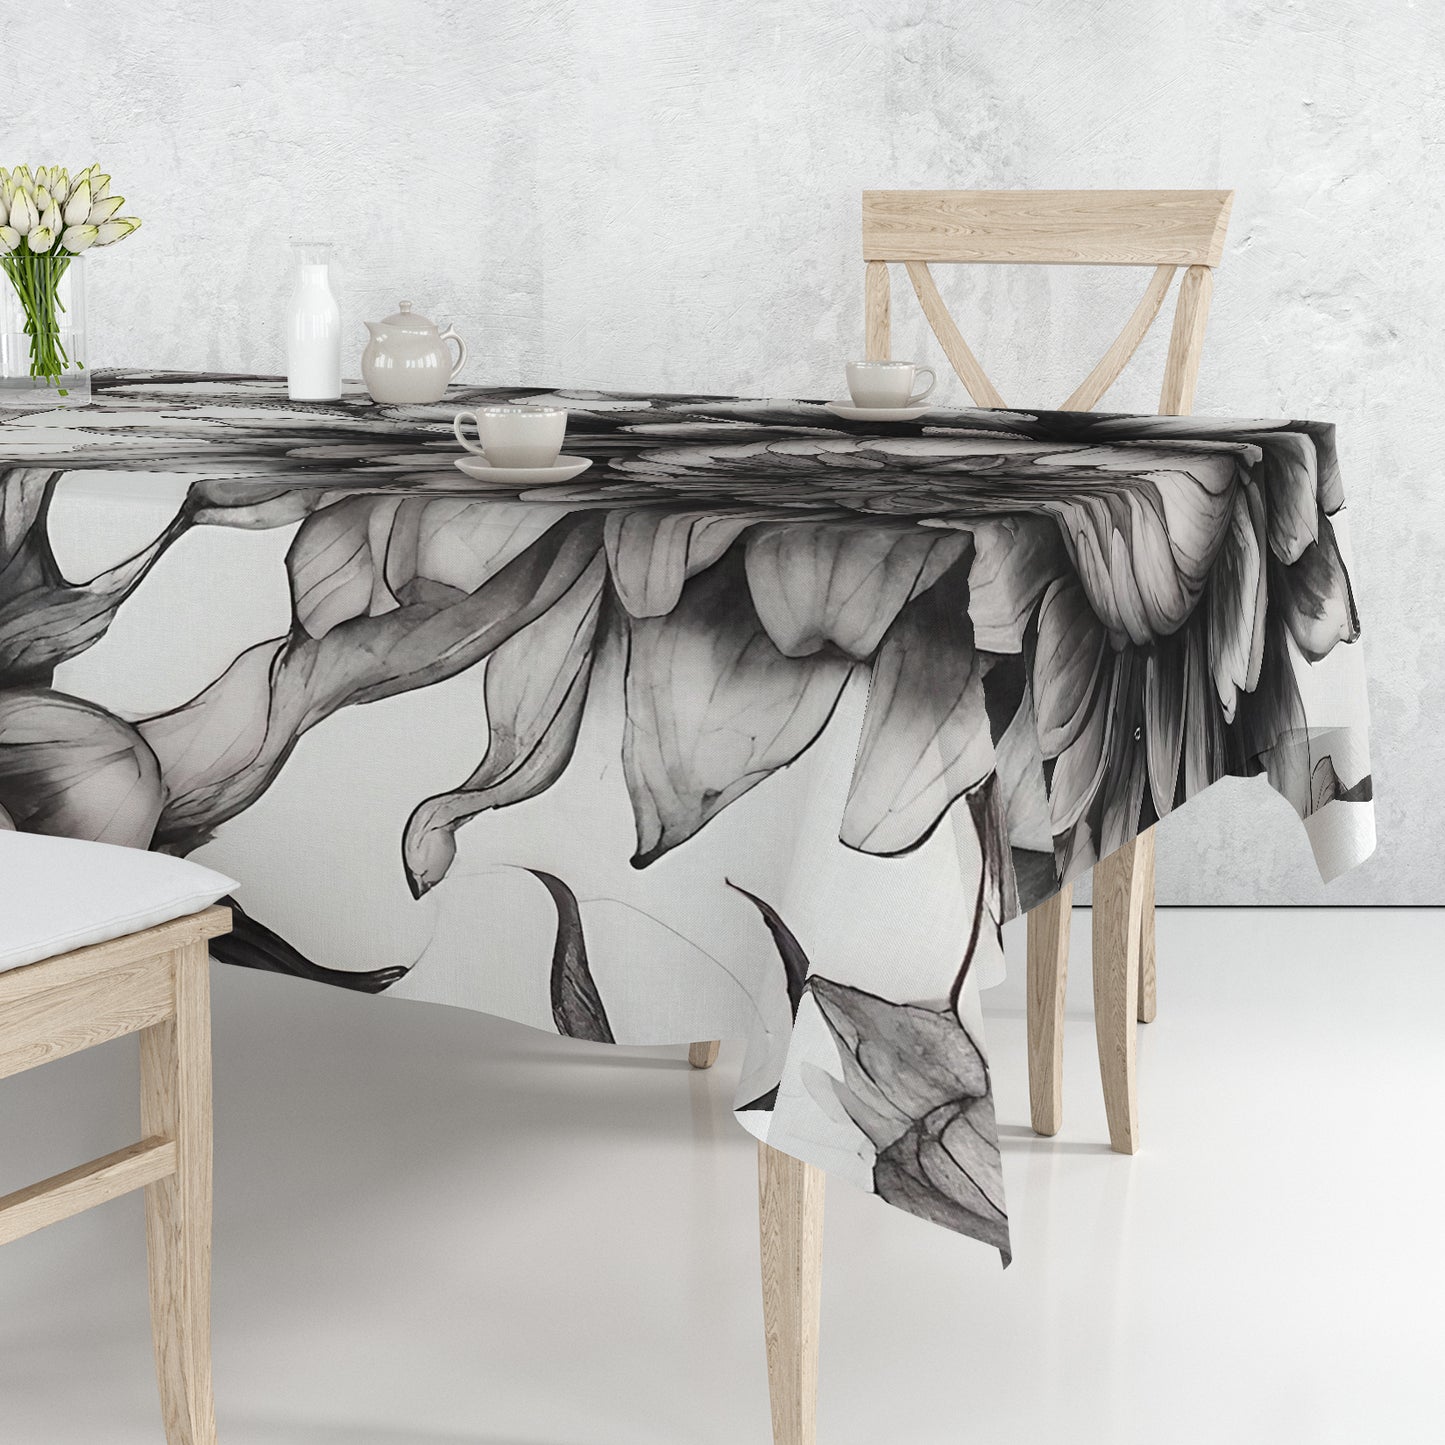 Shadow Bloom Flowers By Nathan Pieterse Rectangle Tablecloth